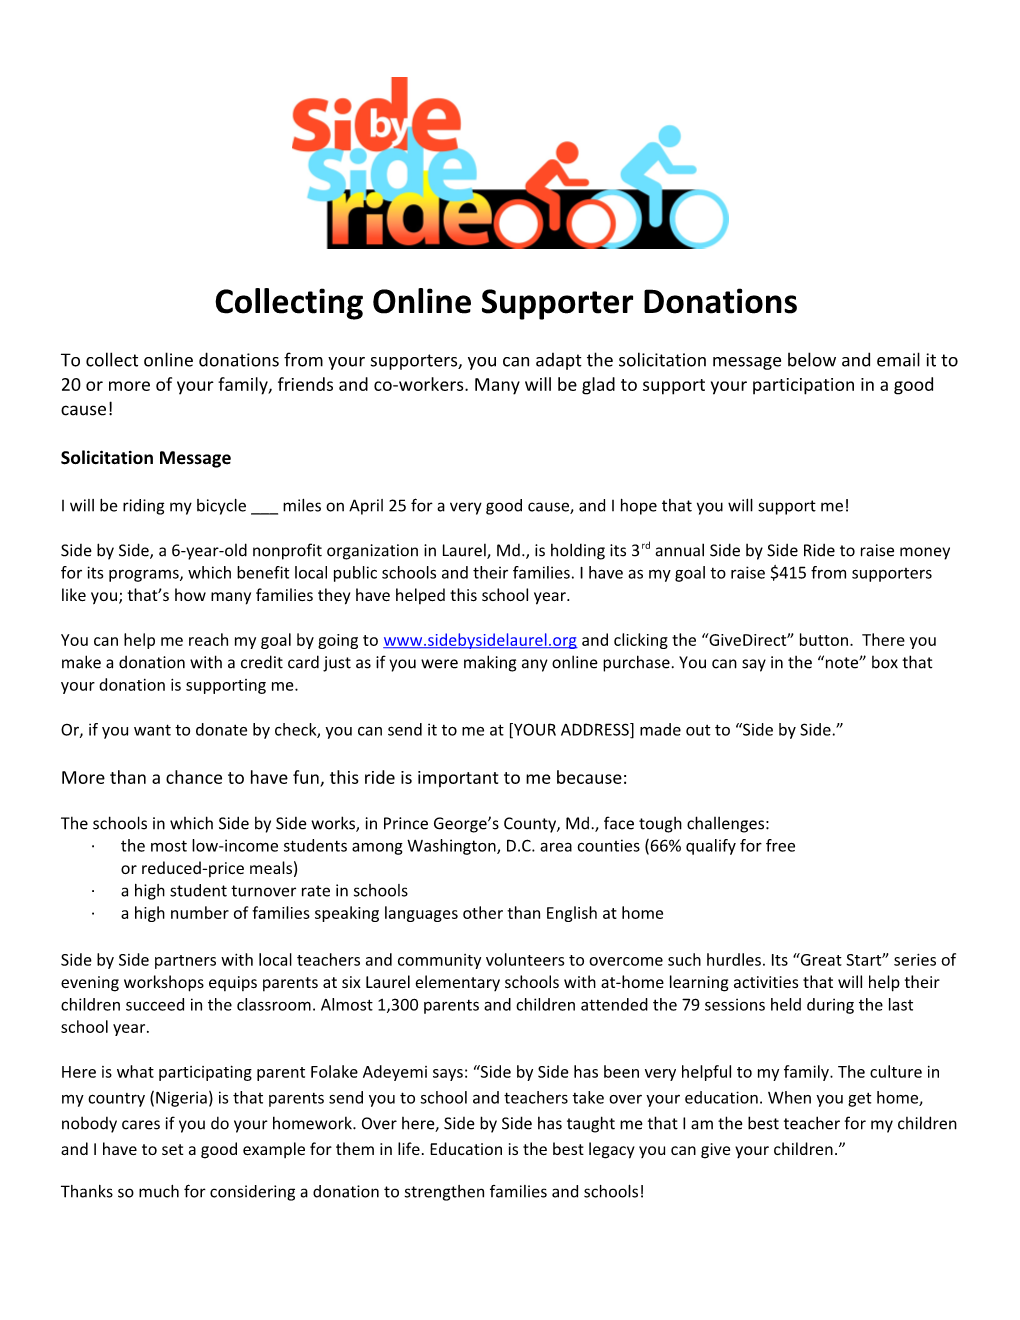 Collecting Onlinesupporter Donations